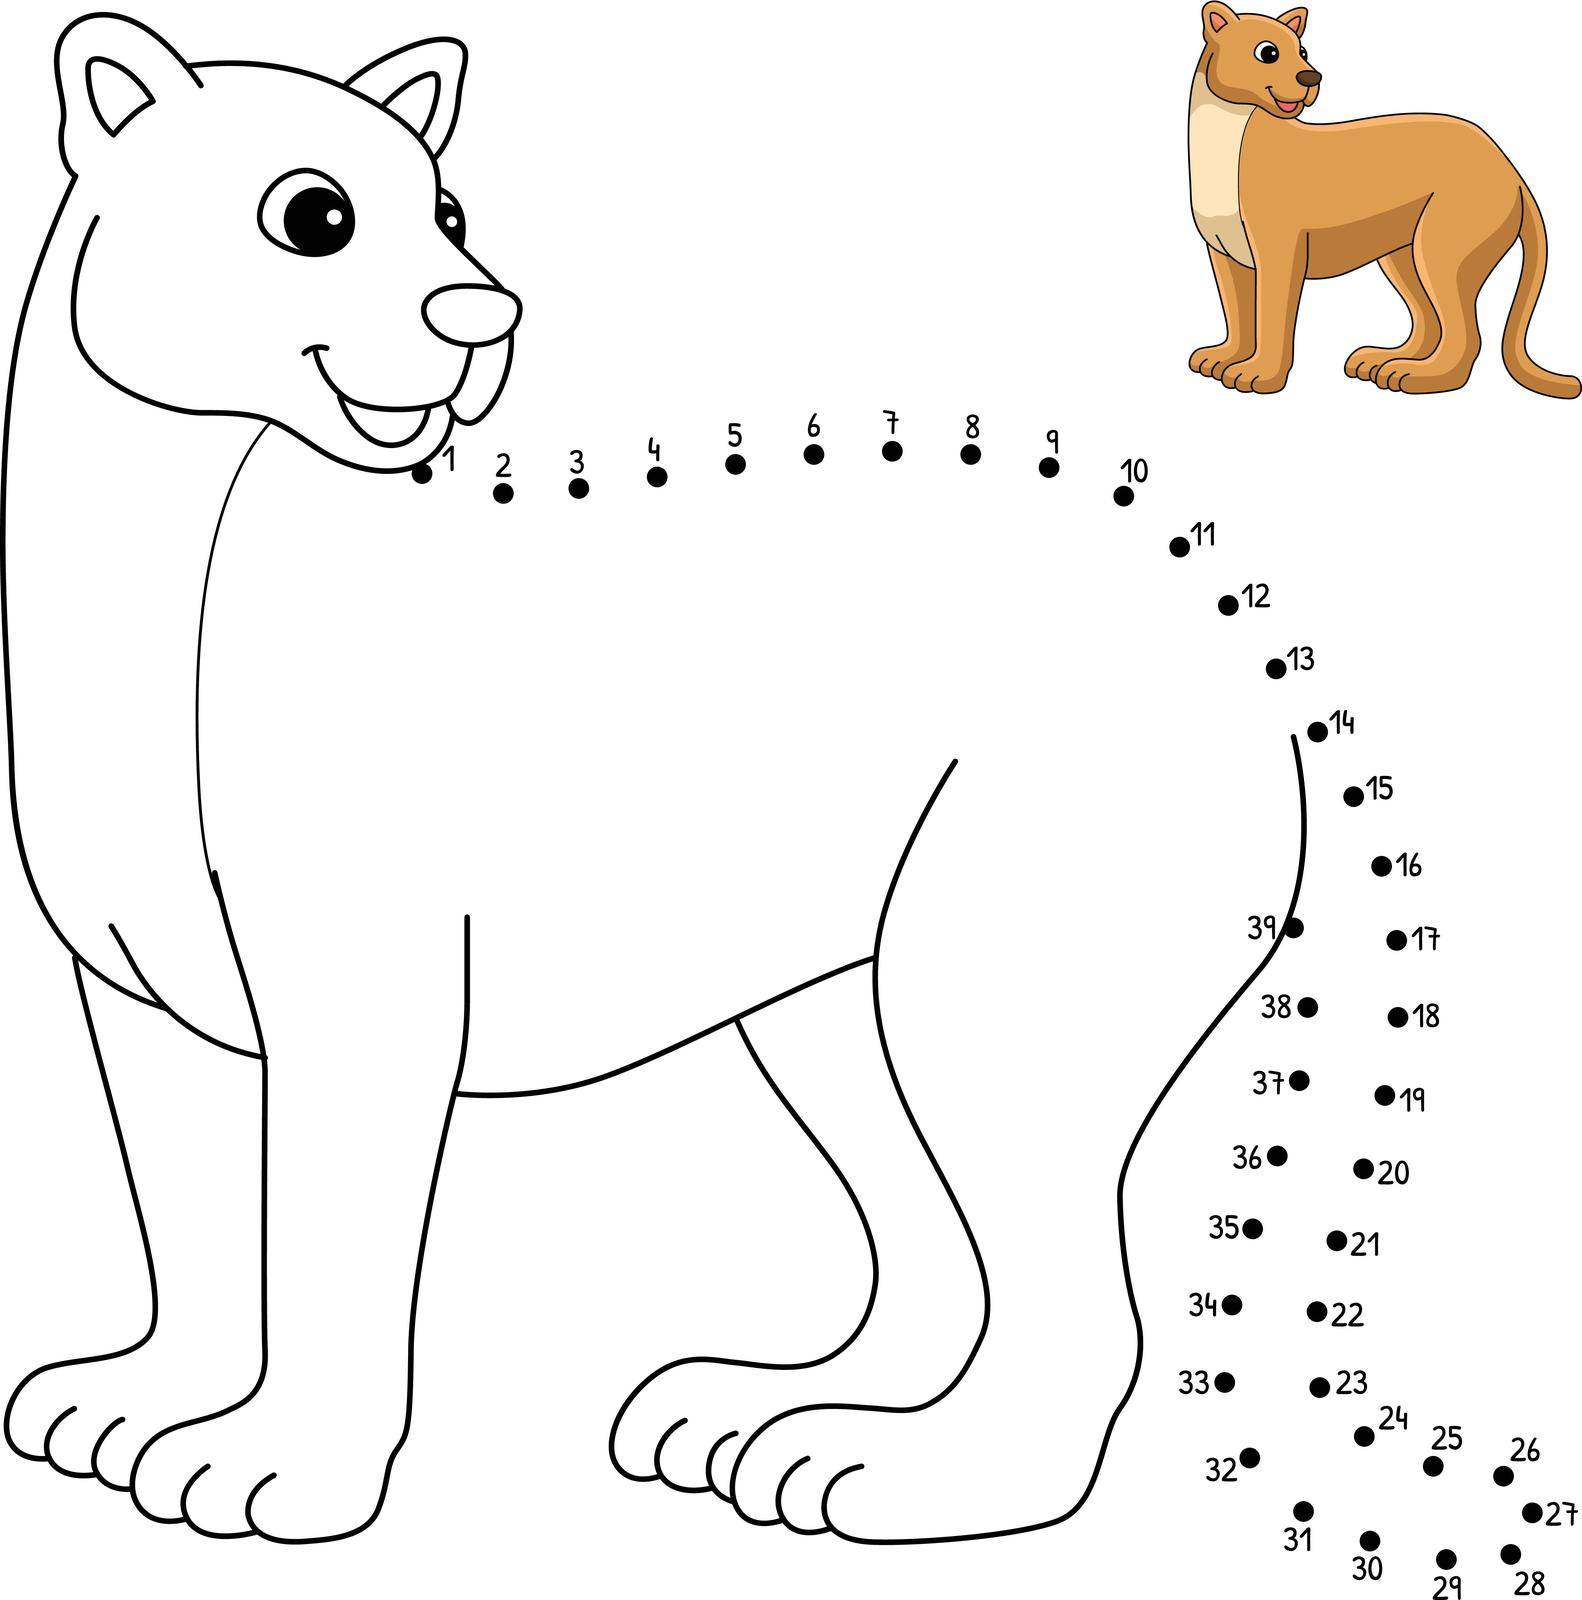 A cute and funny connect-the-dots coloring page of a Puma Animal. Provides hours of coloring fun for children. Color, this page is very easy. Suitable for little kids and toddlers.